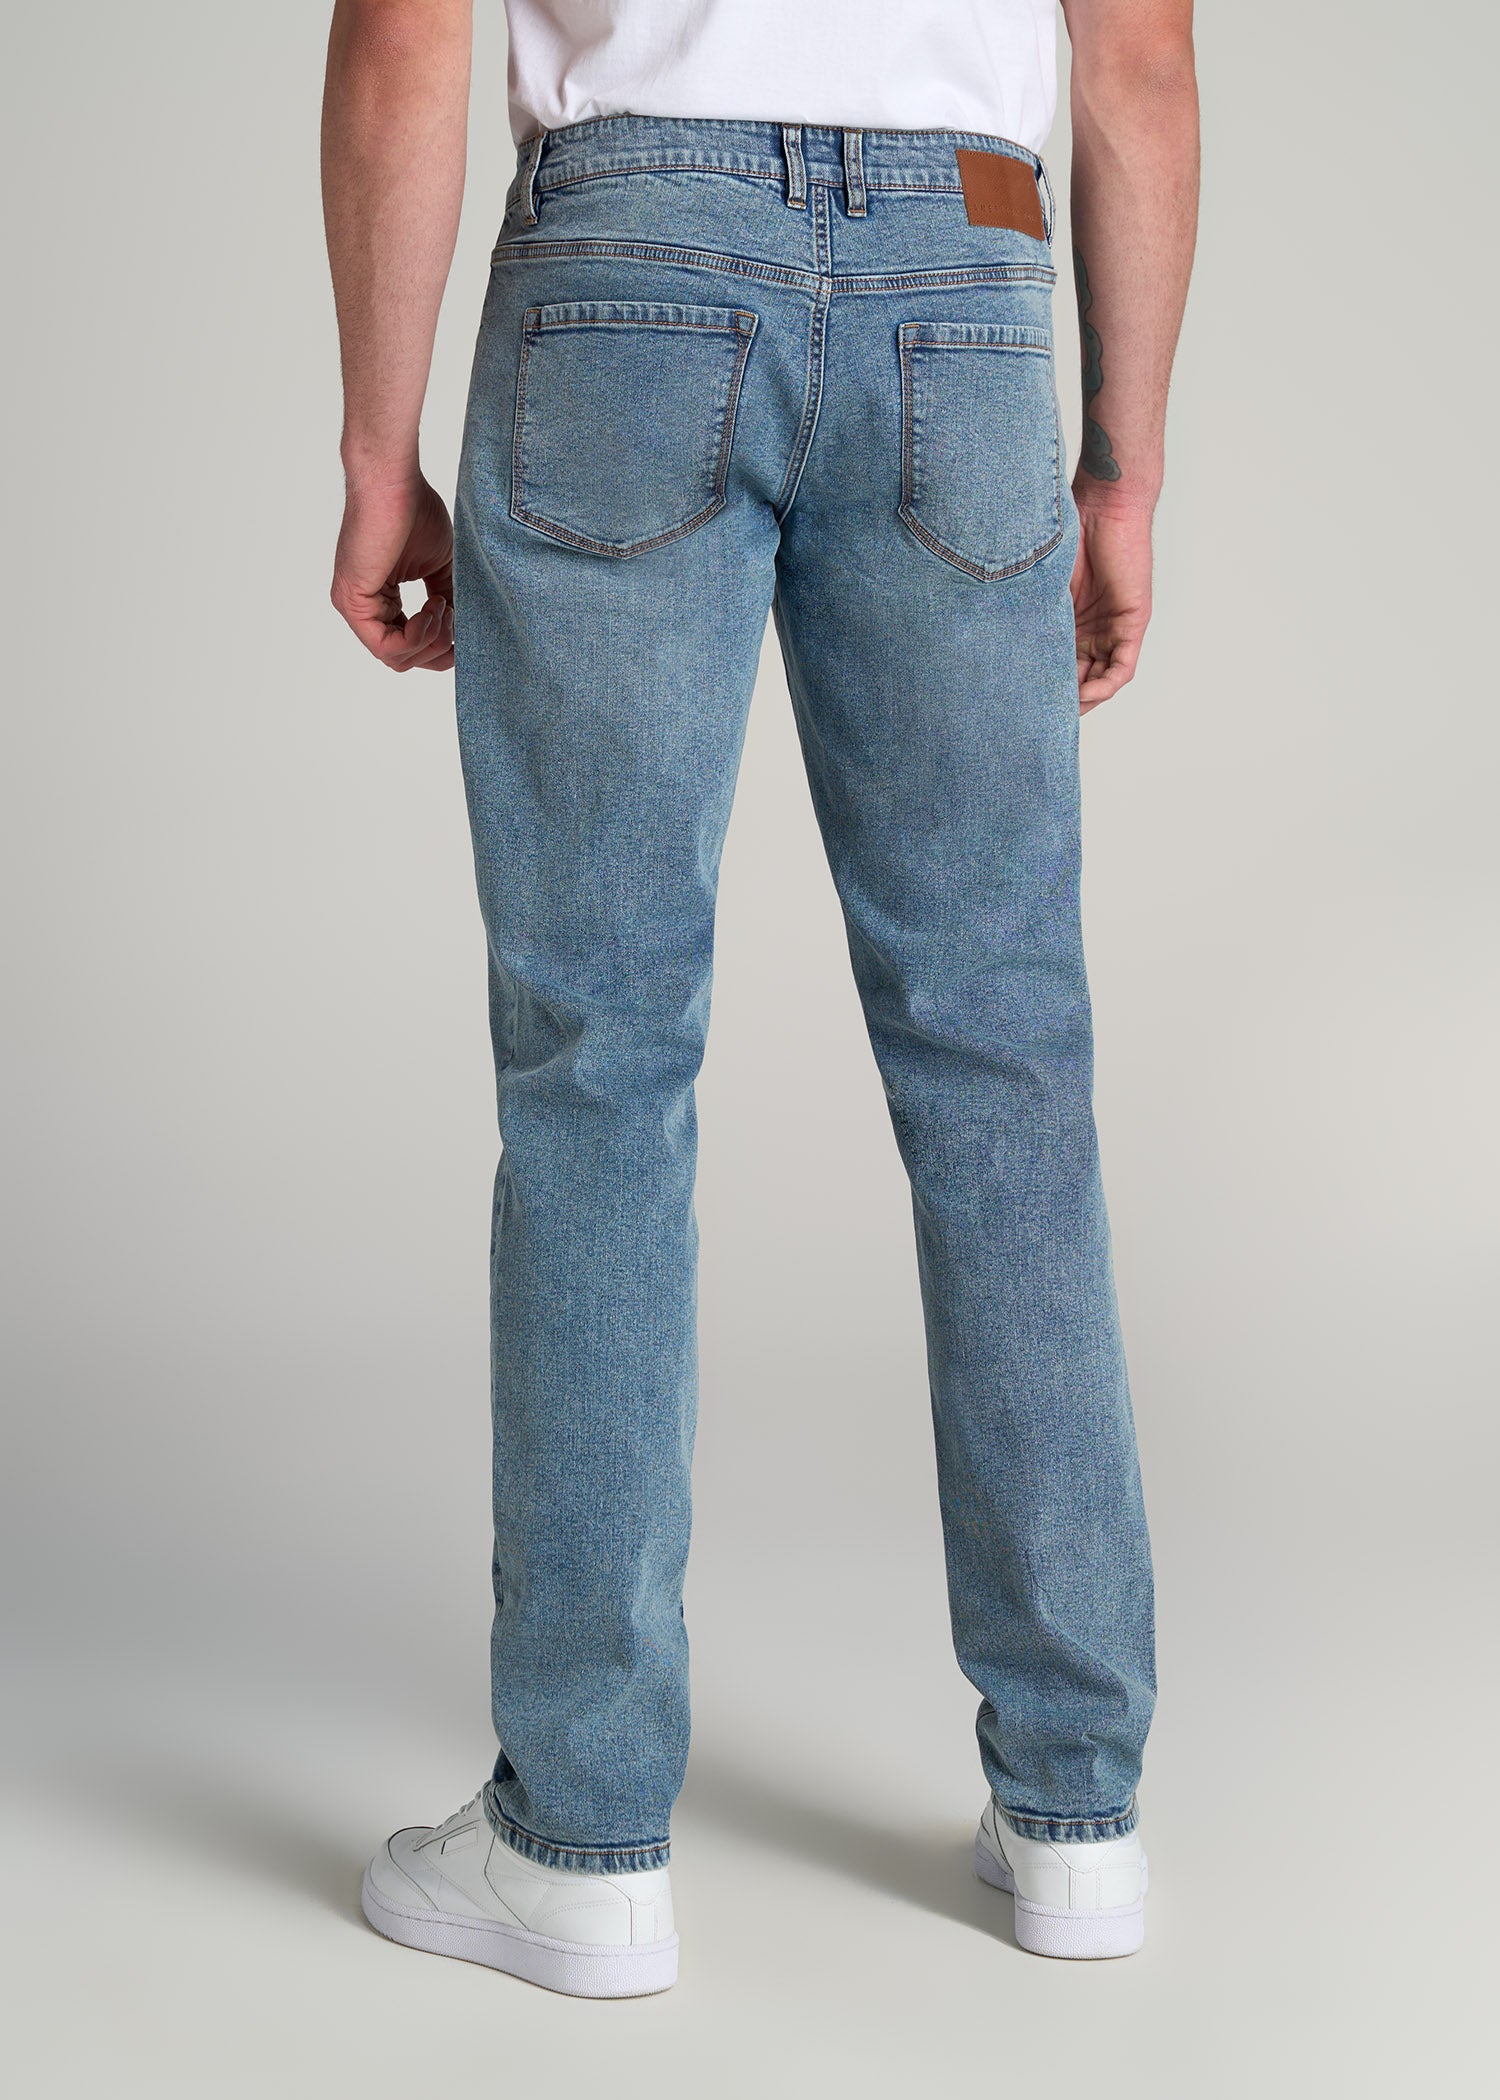 Carman Tapered Jeans For Tall Men Vintage Faded Blue